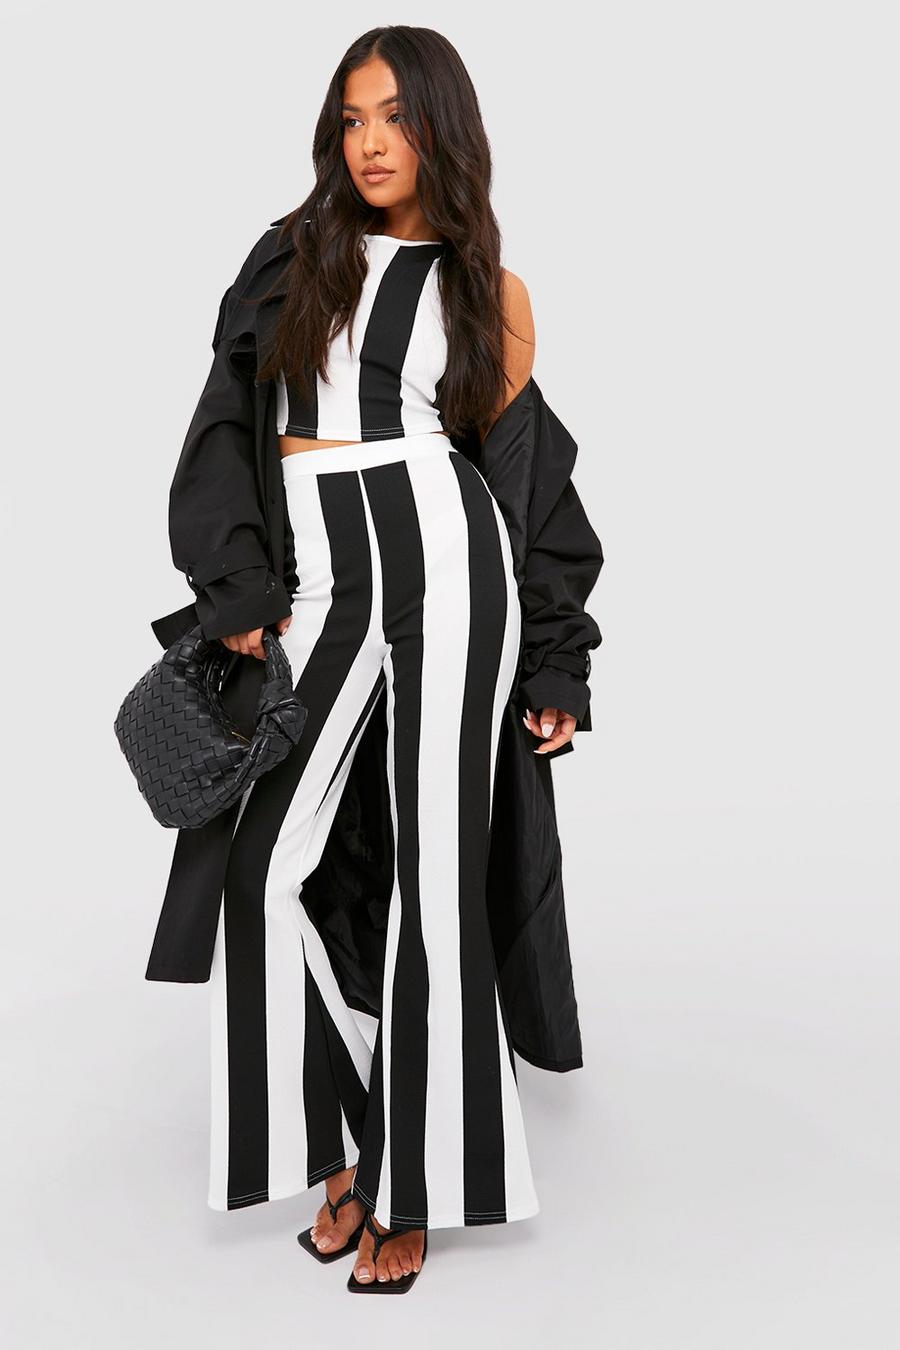 Black Petite Racer Monochrome Top And Flare Two-Piece